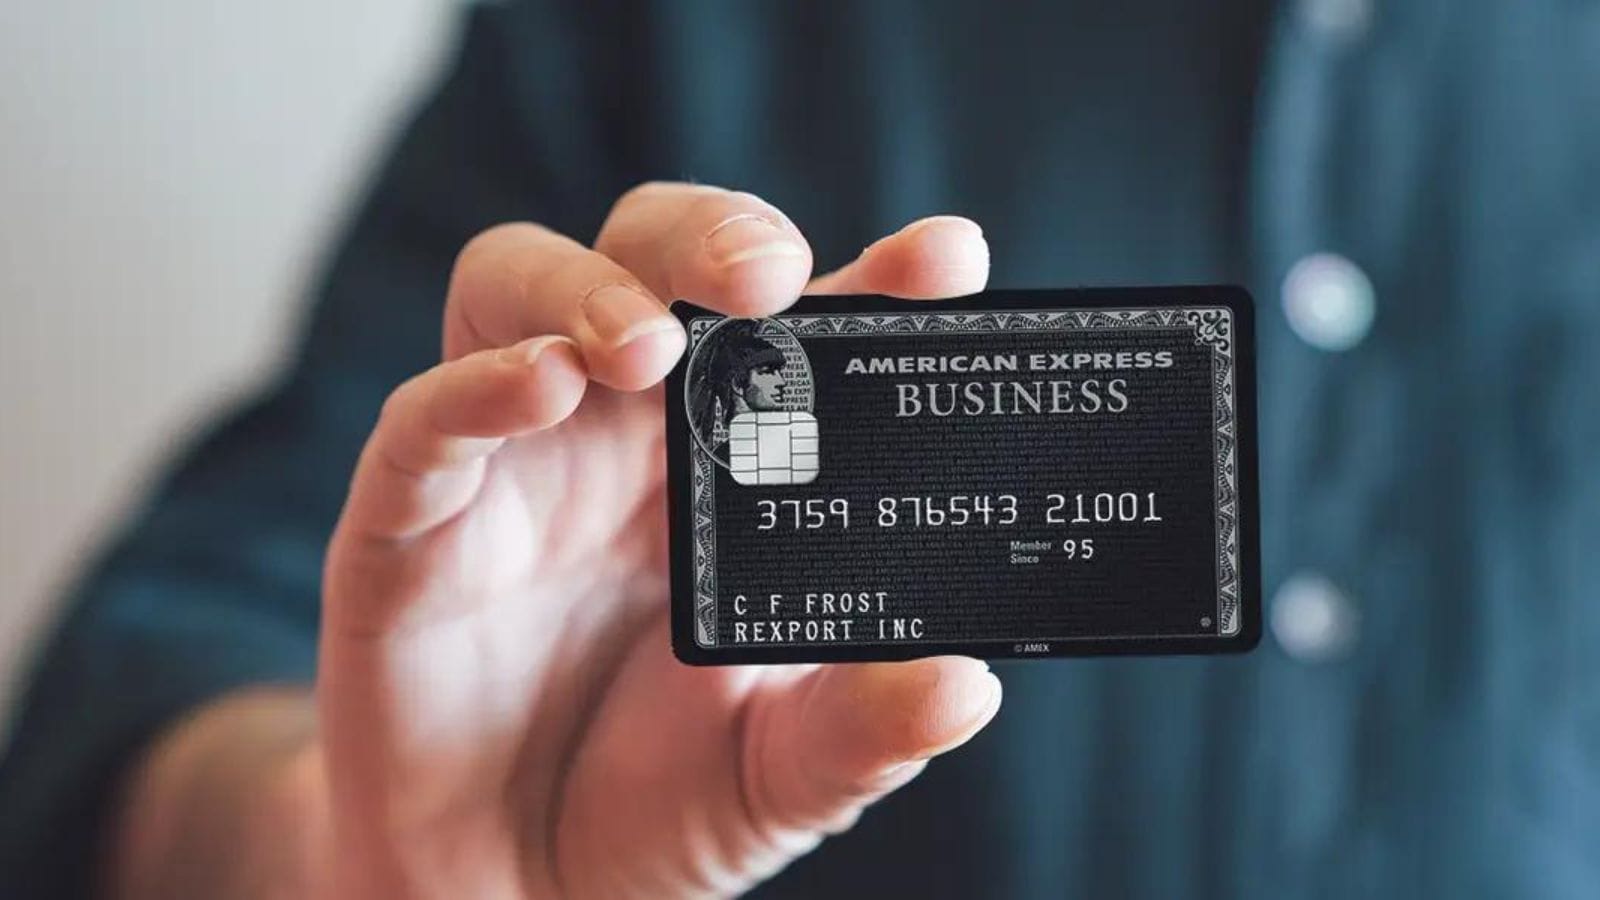 The History of American Express and their Business Model